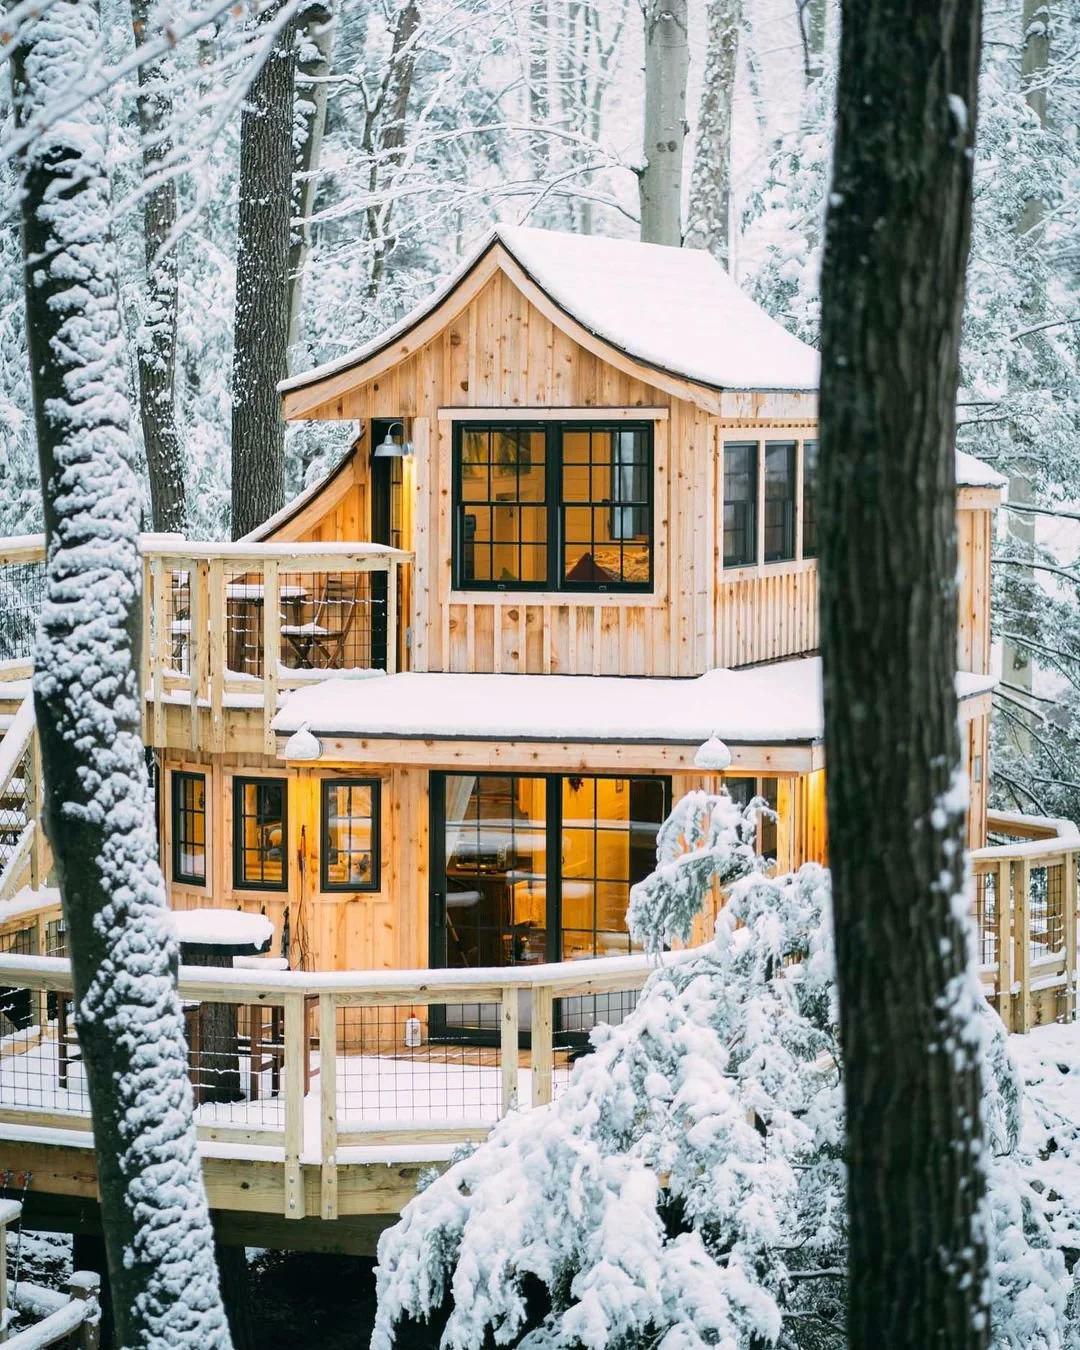 Winter Cabin In Hocking Hills, Ohio, By Levi M. Kelly